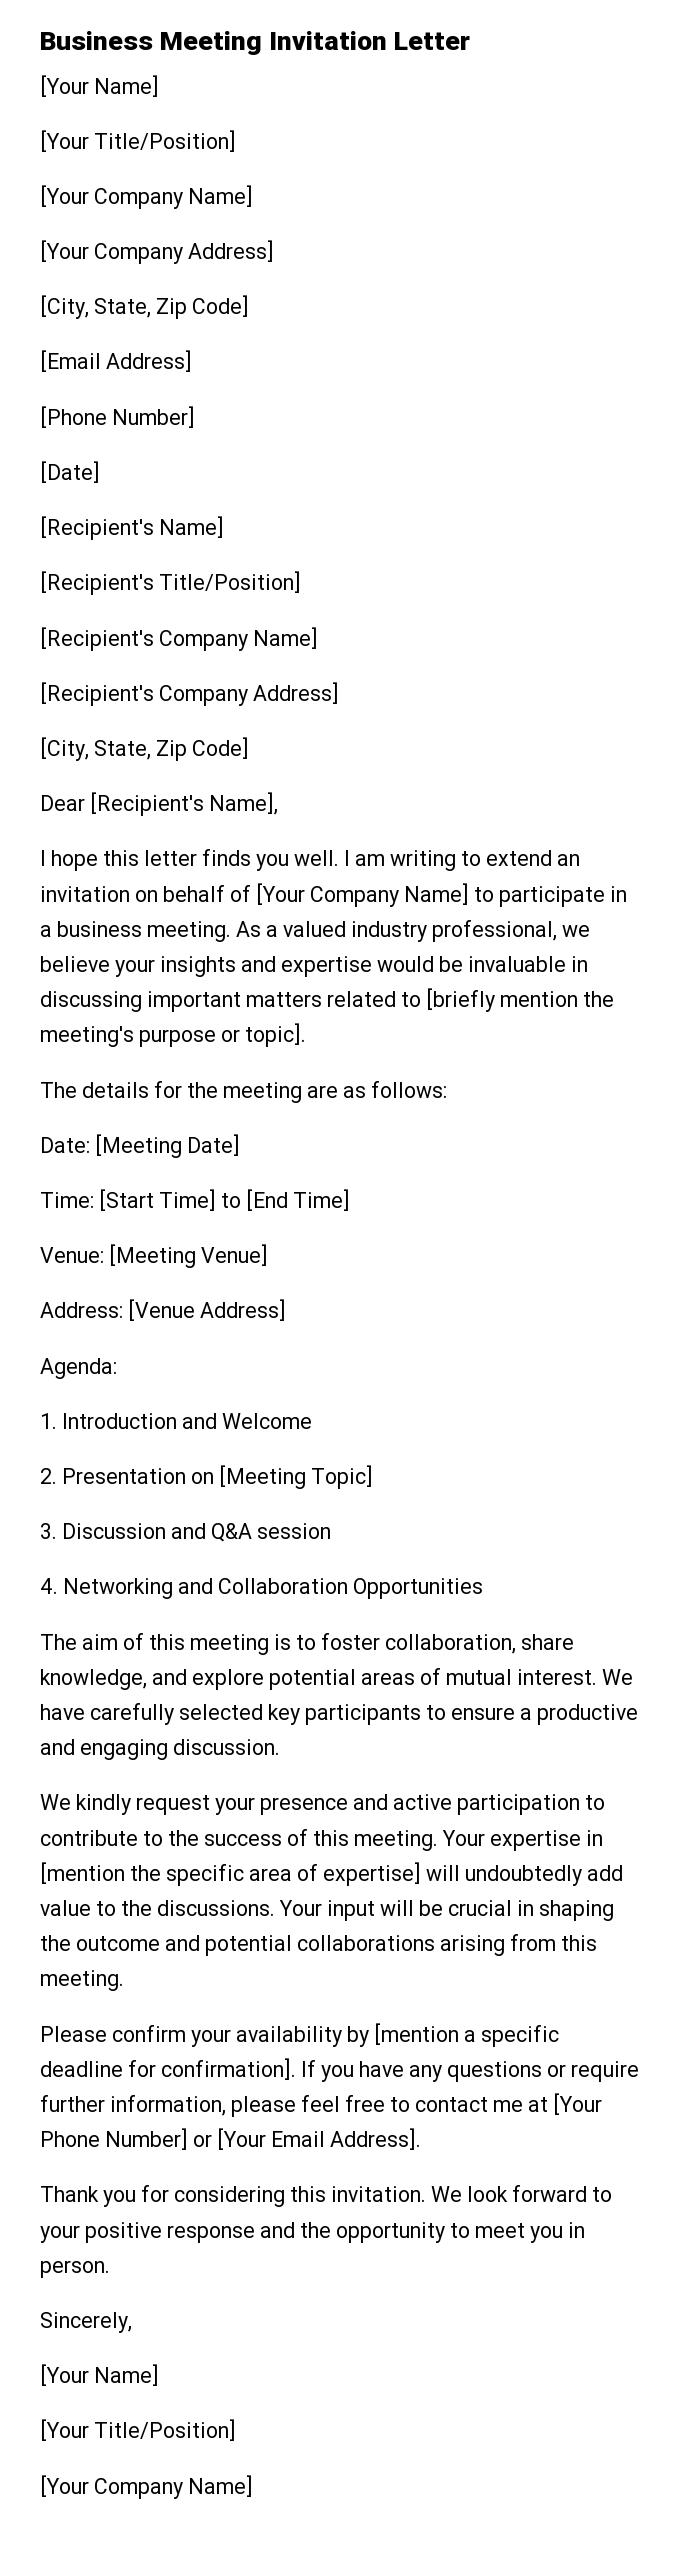 Business Meeting Invitation Letter